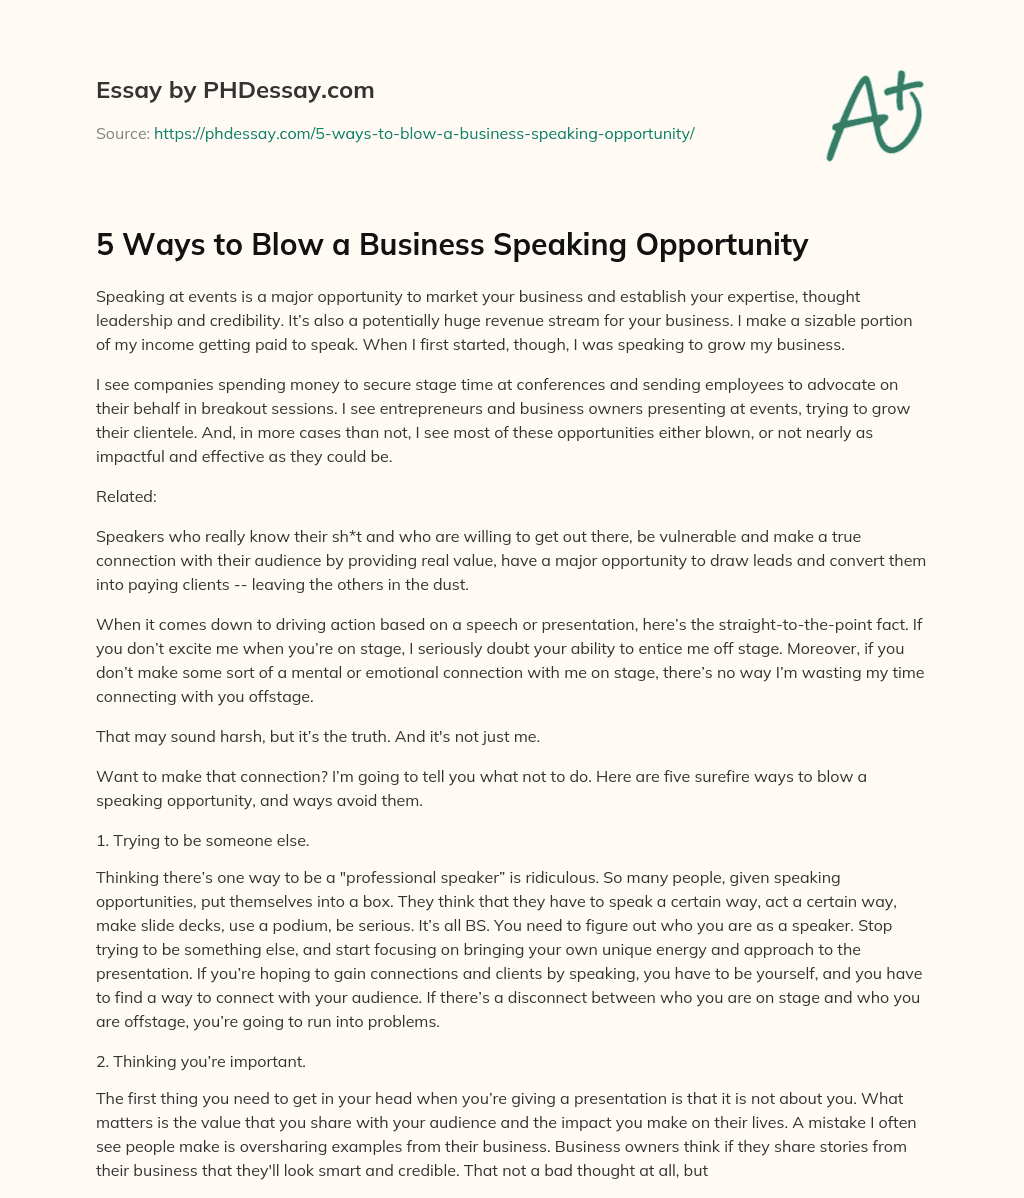 5 Ways to Blow a Business Speaking Opportunity essay